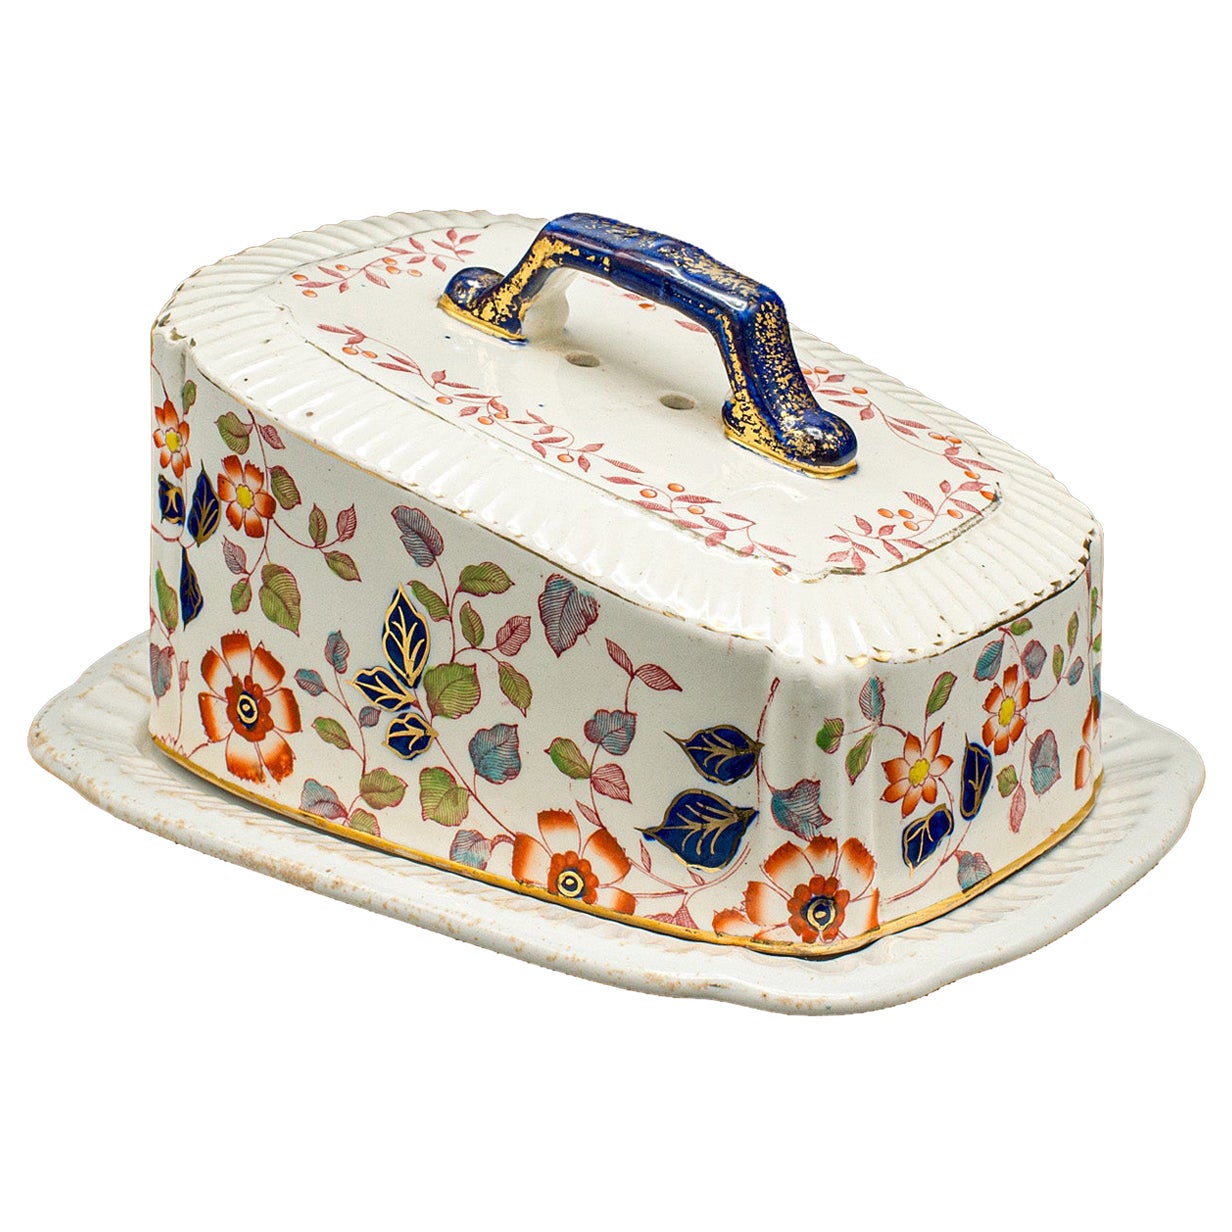 Antique Decorative Cheese Keeper, English, Ceramic, Butter Dish, Victorian, 1900 For Sale